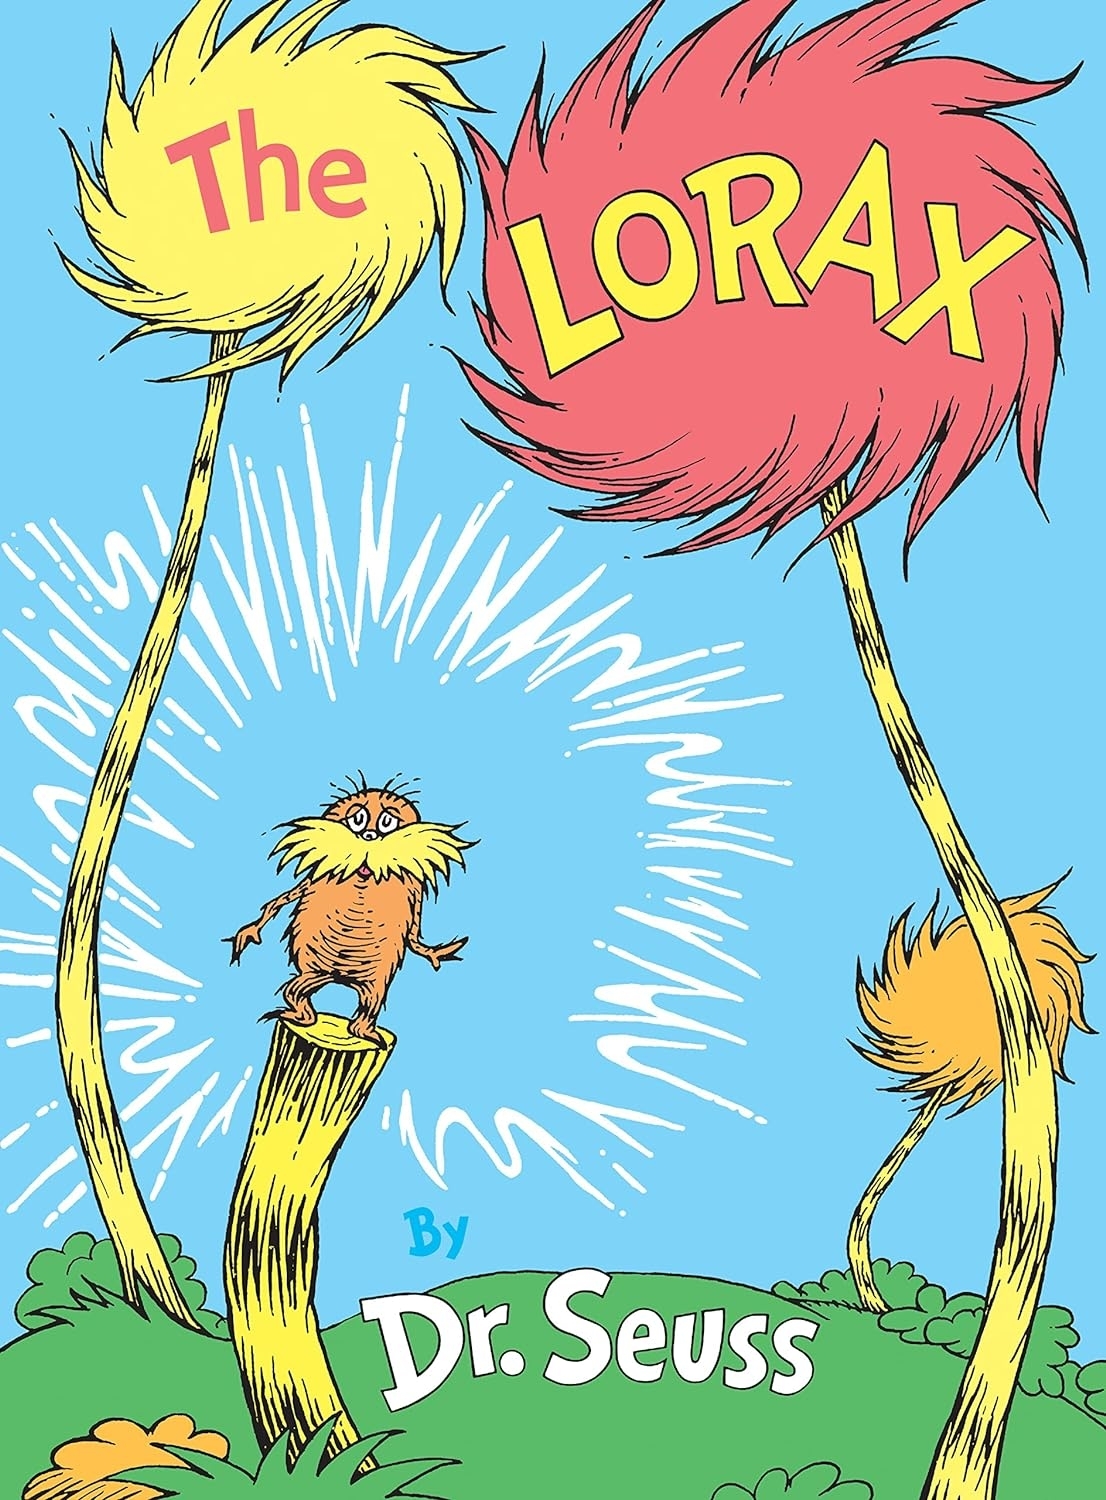 Cover of &quot;The Lorax&quot; by Dr. Seuss, with the Lorax standing on a stump amid truffula trees